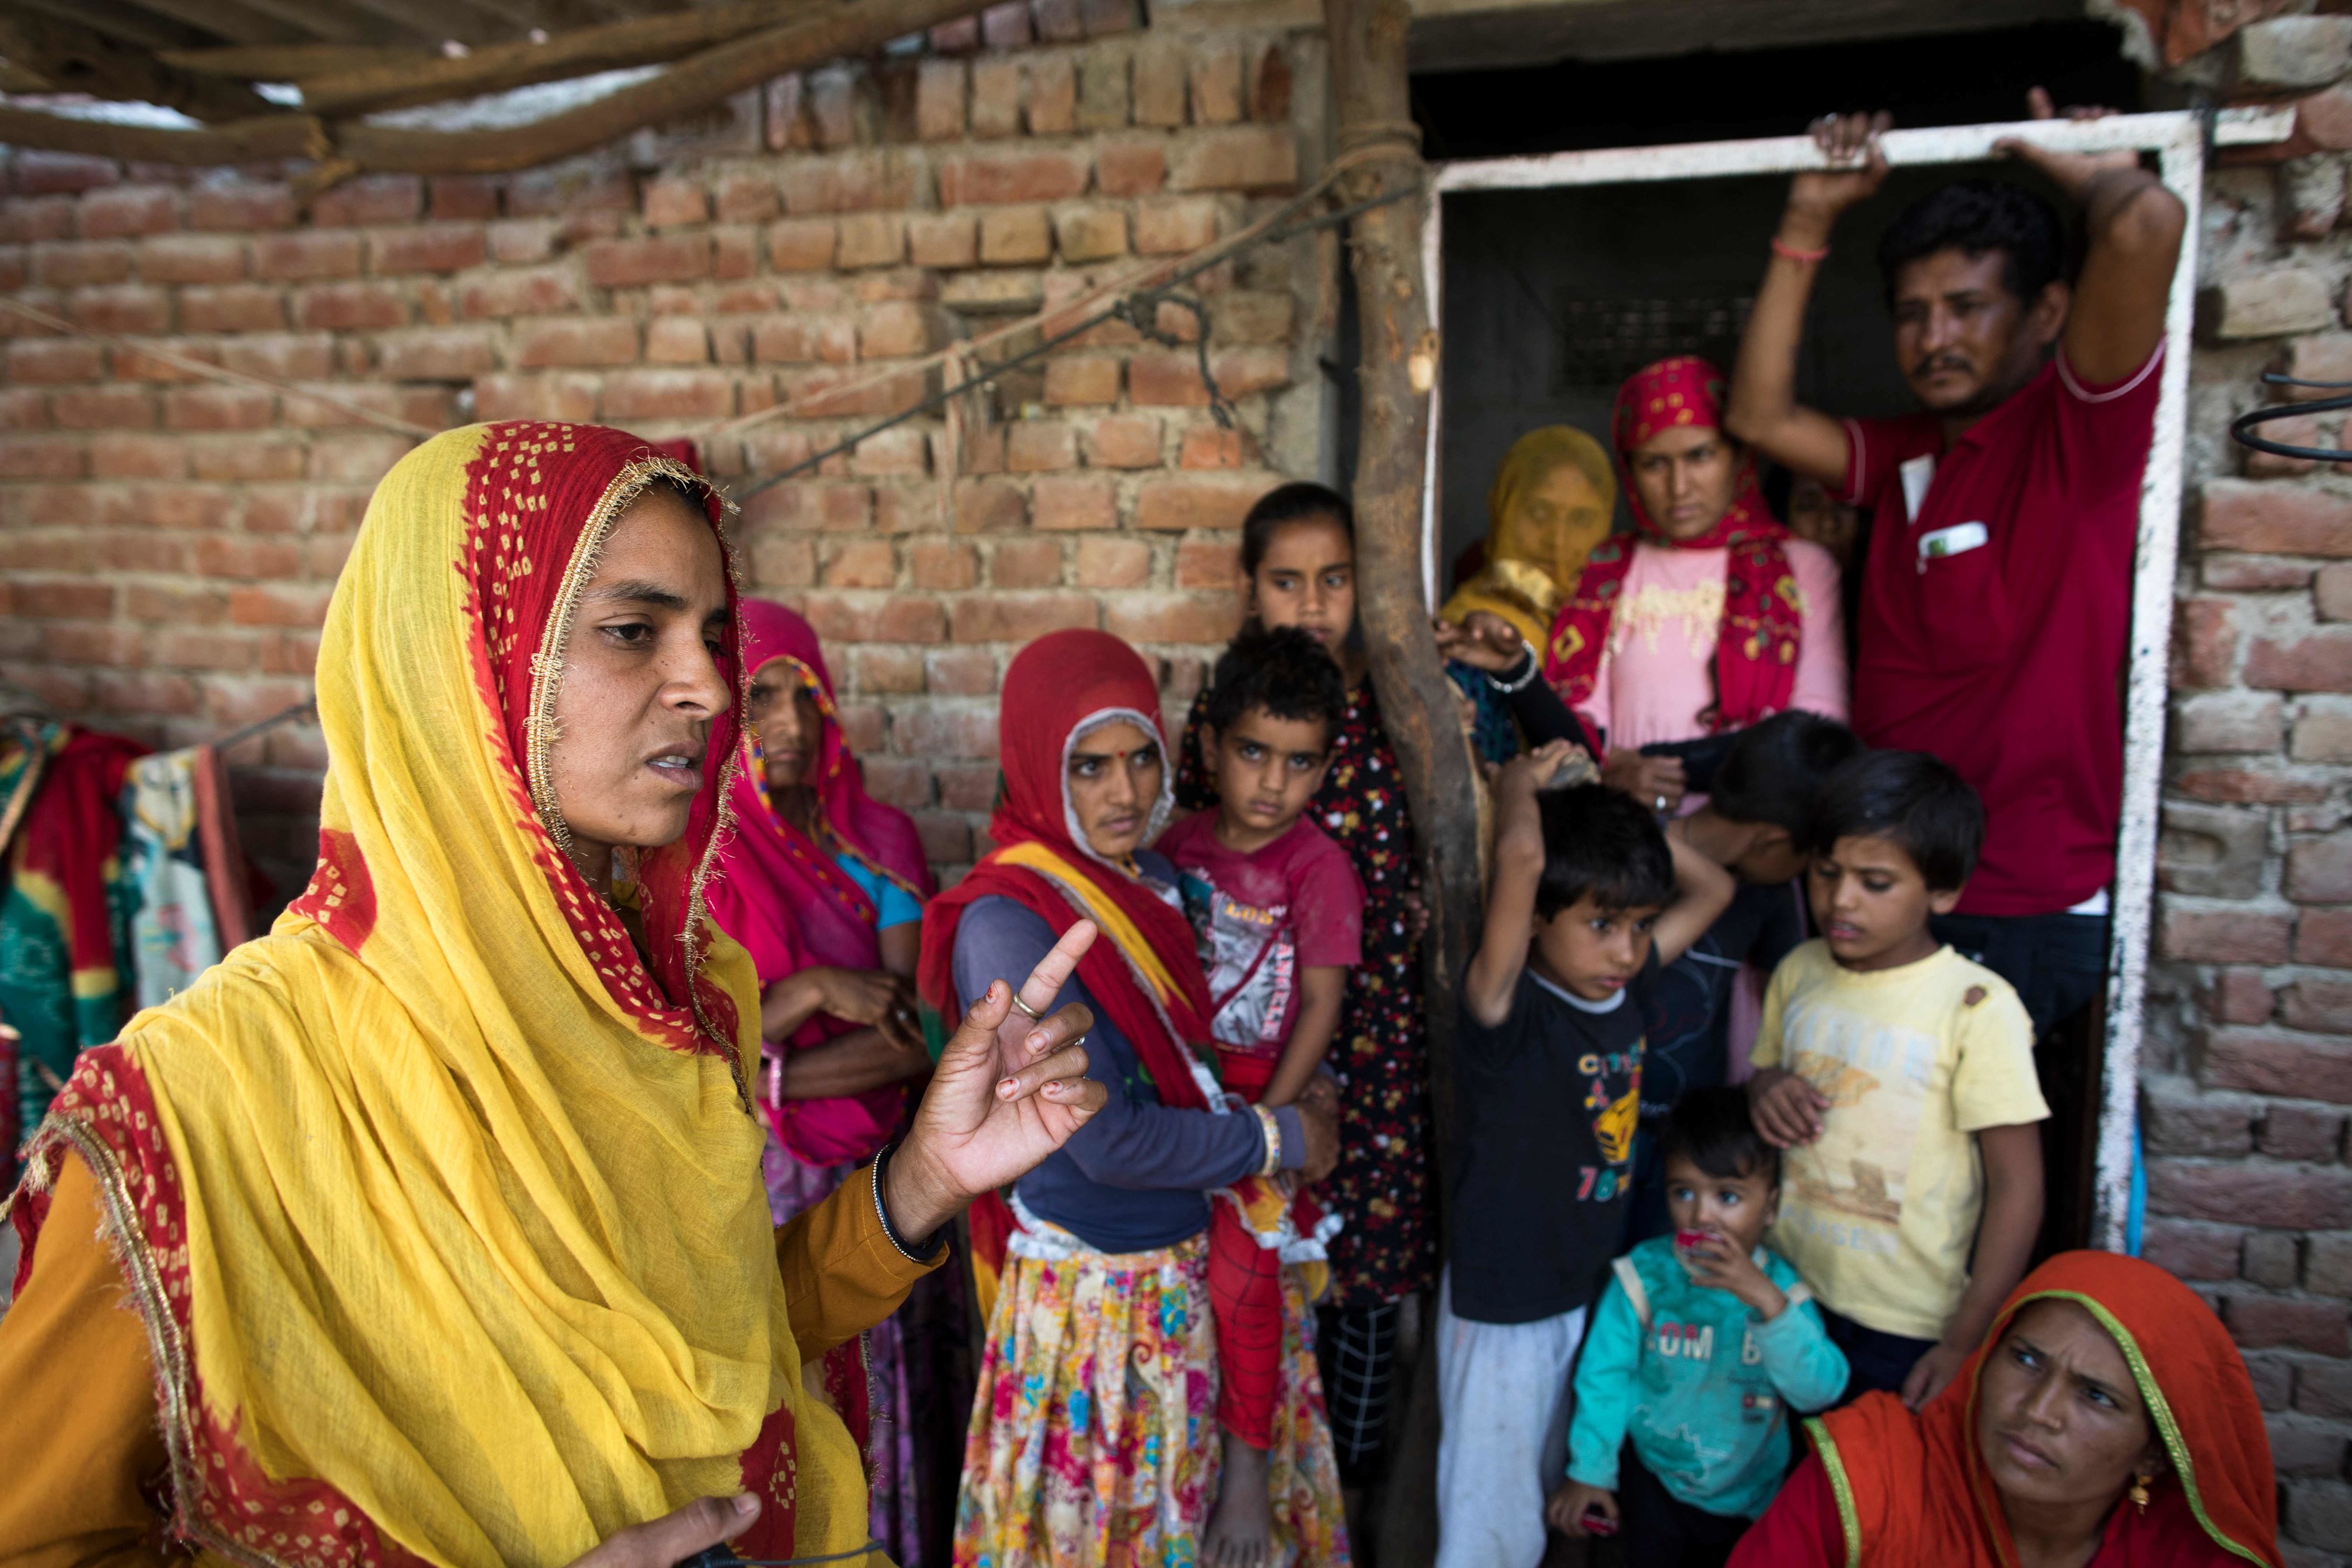 Sonu (L), the elder sister of three married women who were found dead along with their two children in a well in Dudu village on May 28, speaks during an interview with AFP at the family home in Chhapya village in India.  Rajasthani State